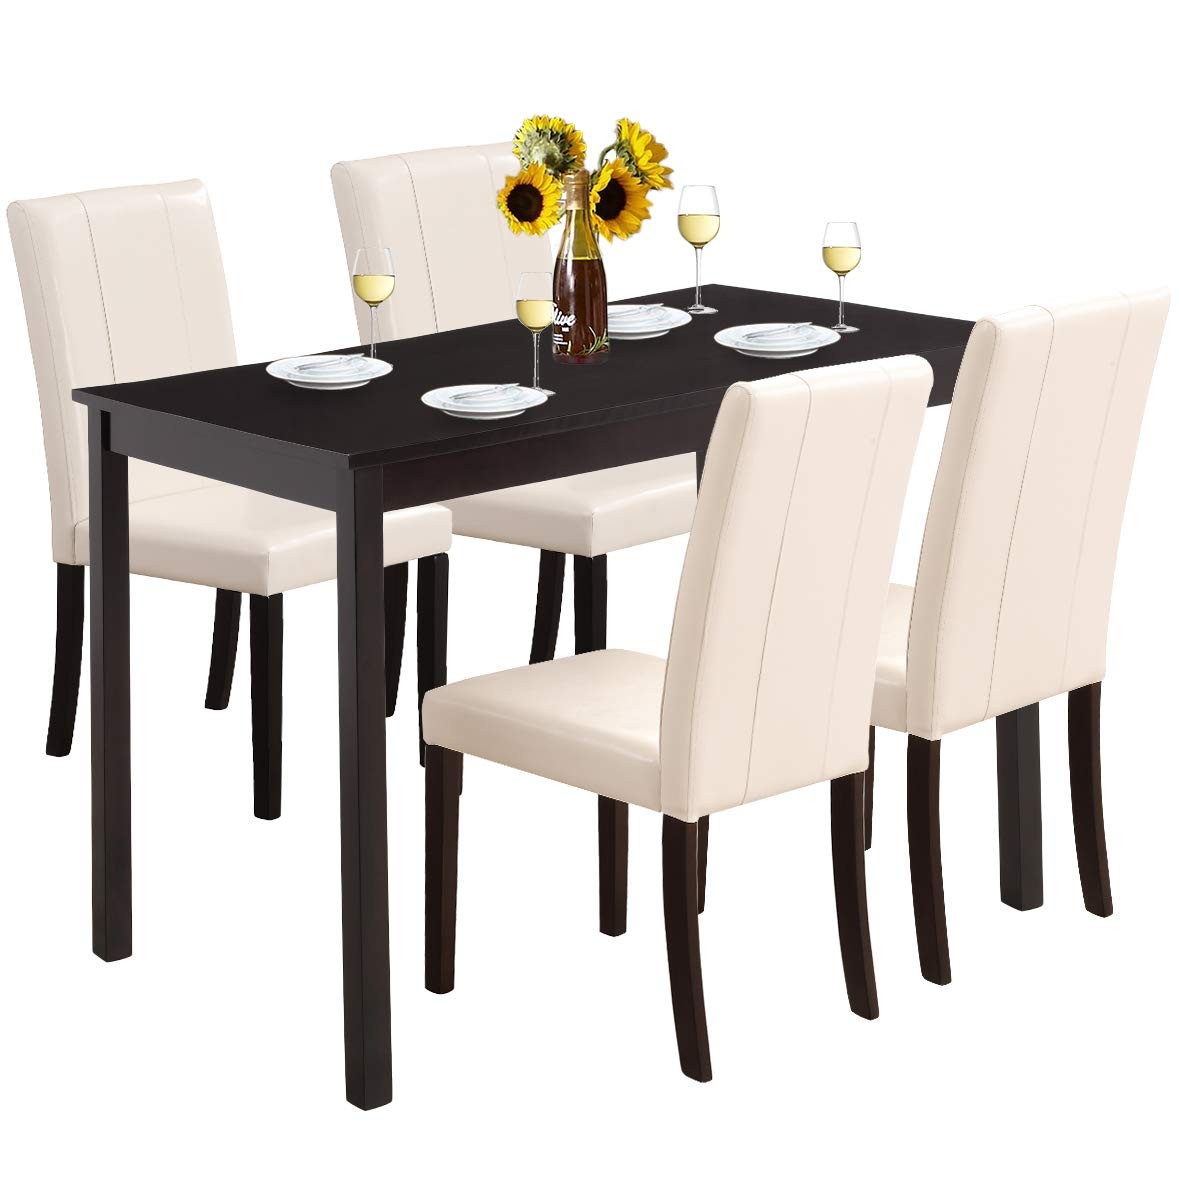 Dining Table Set for 4 Person Home Kitchen Table and 4 PU Leather Chairs Black Beige